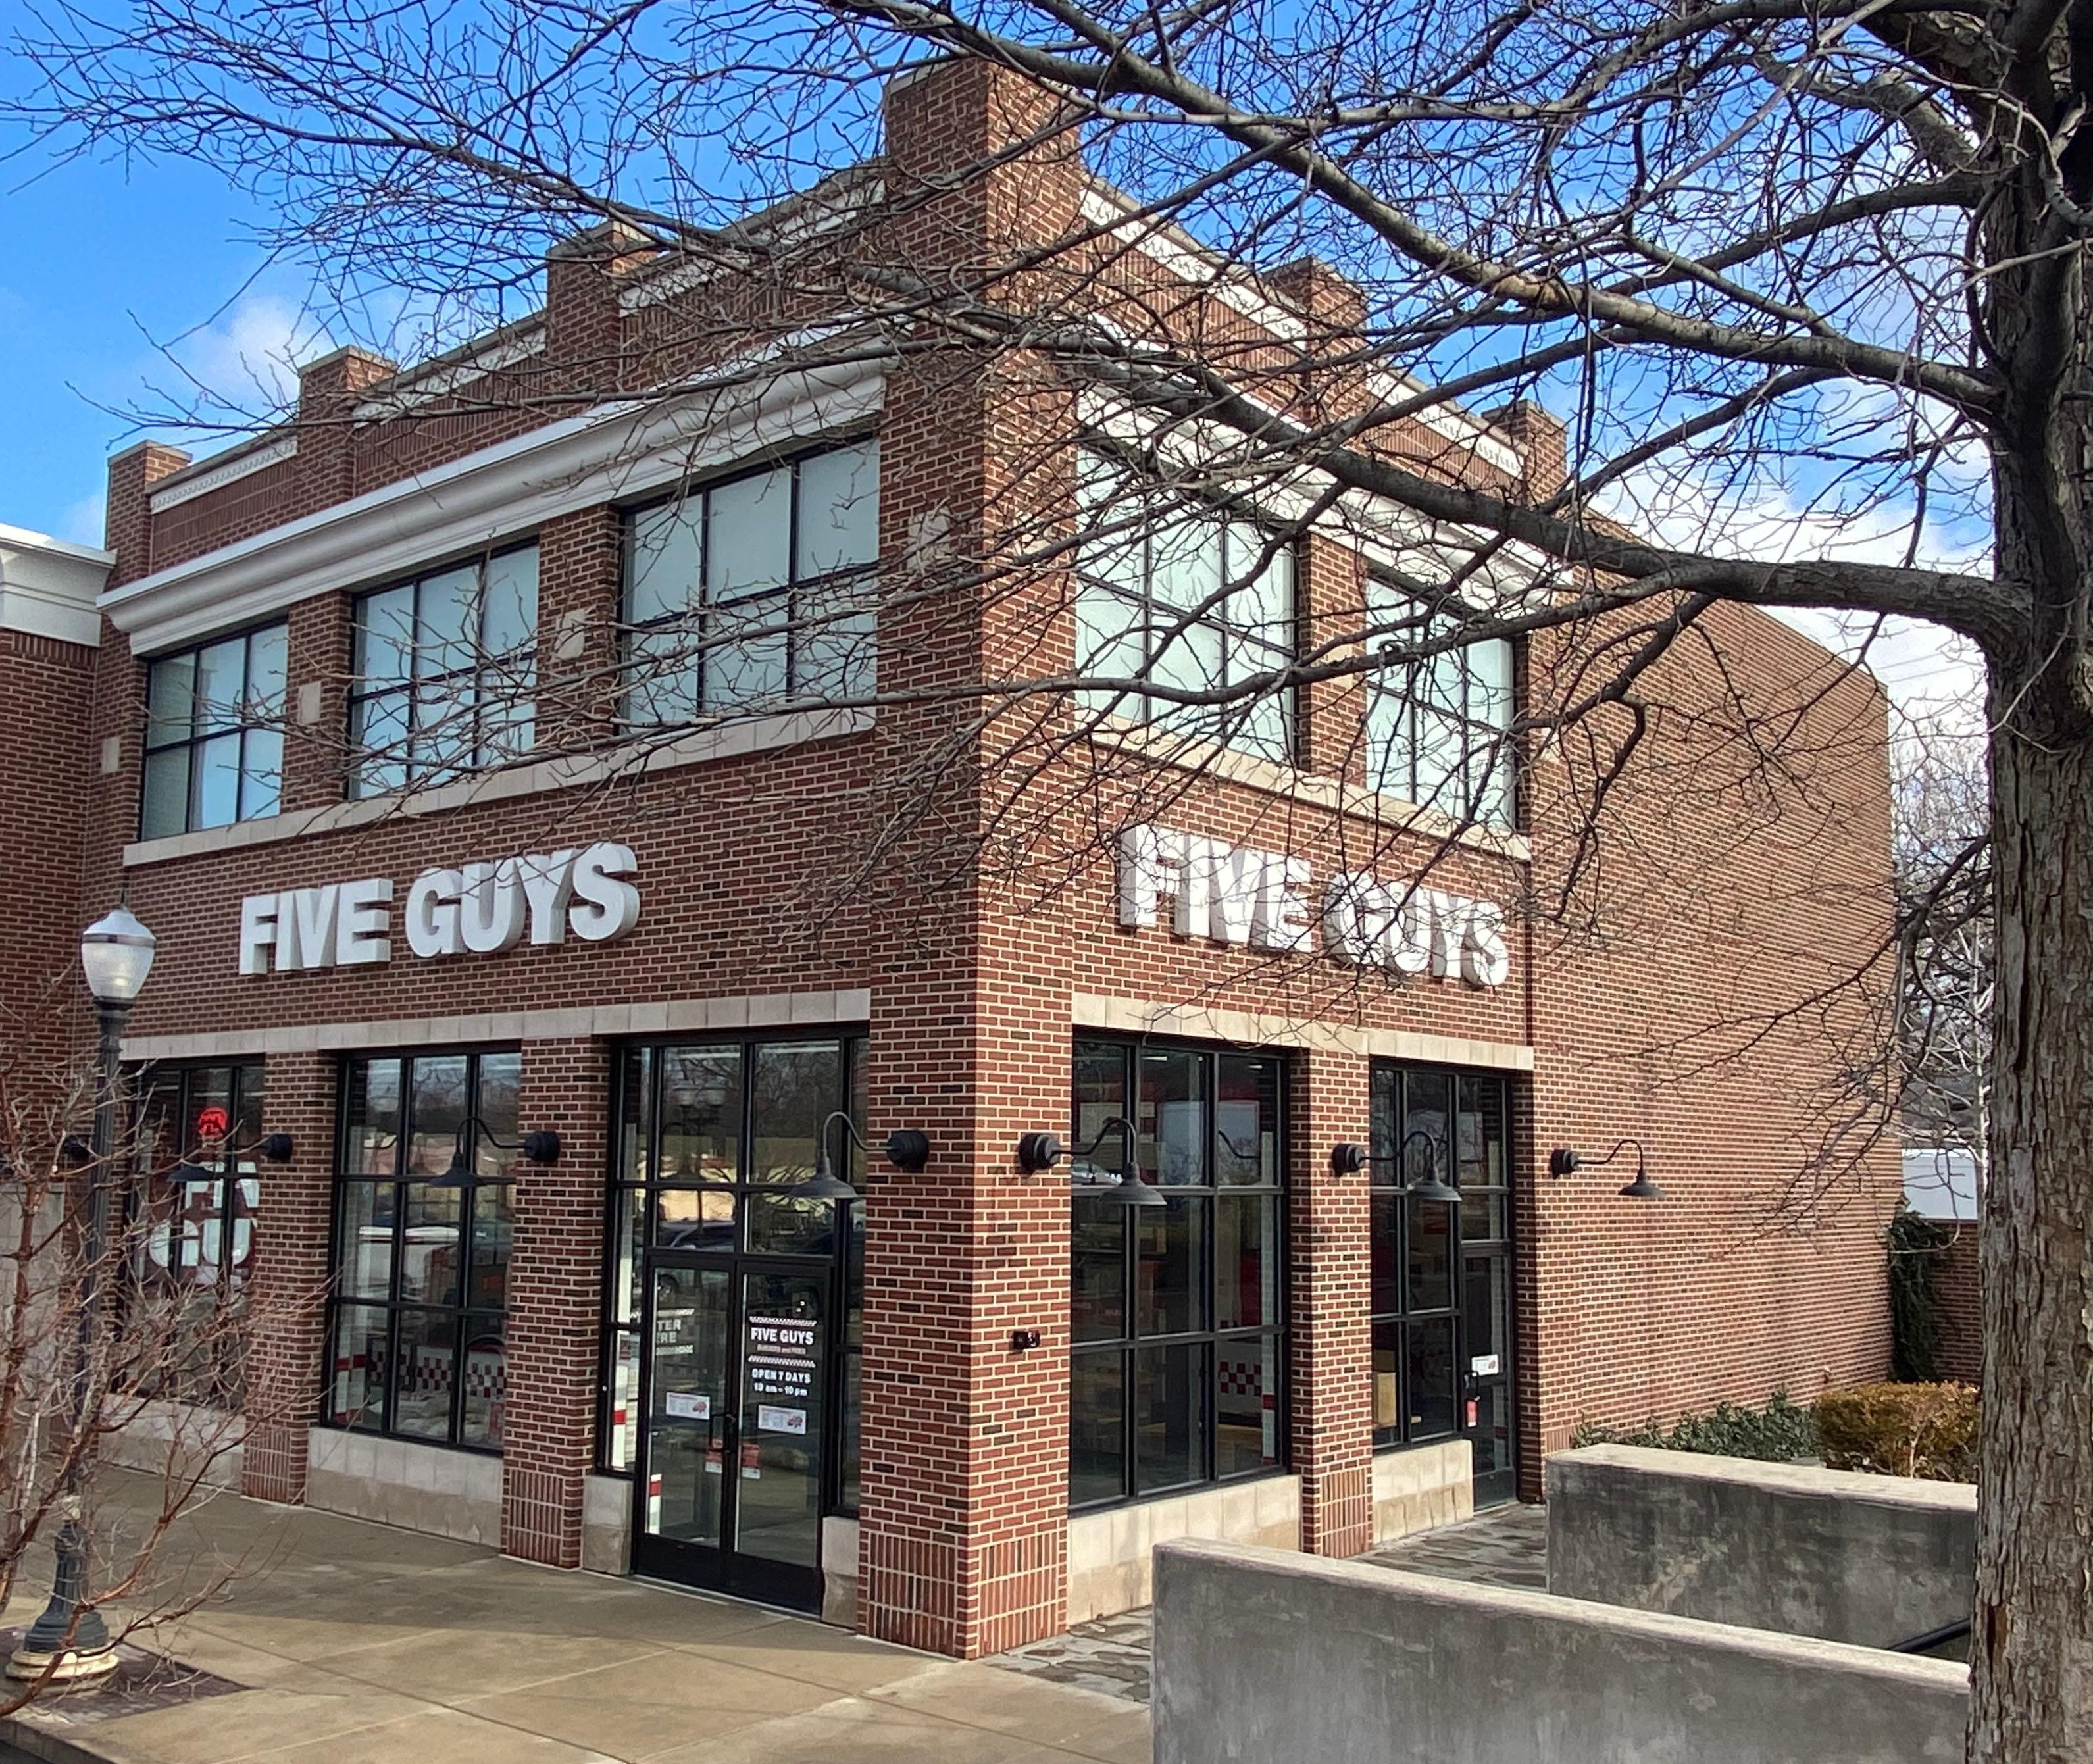 Exterior photograph of the Five Guys restaurant at 8231 Calumet Avenue in Munster, Indiana.